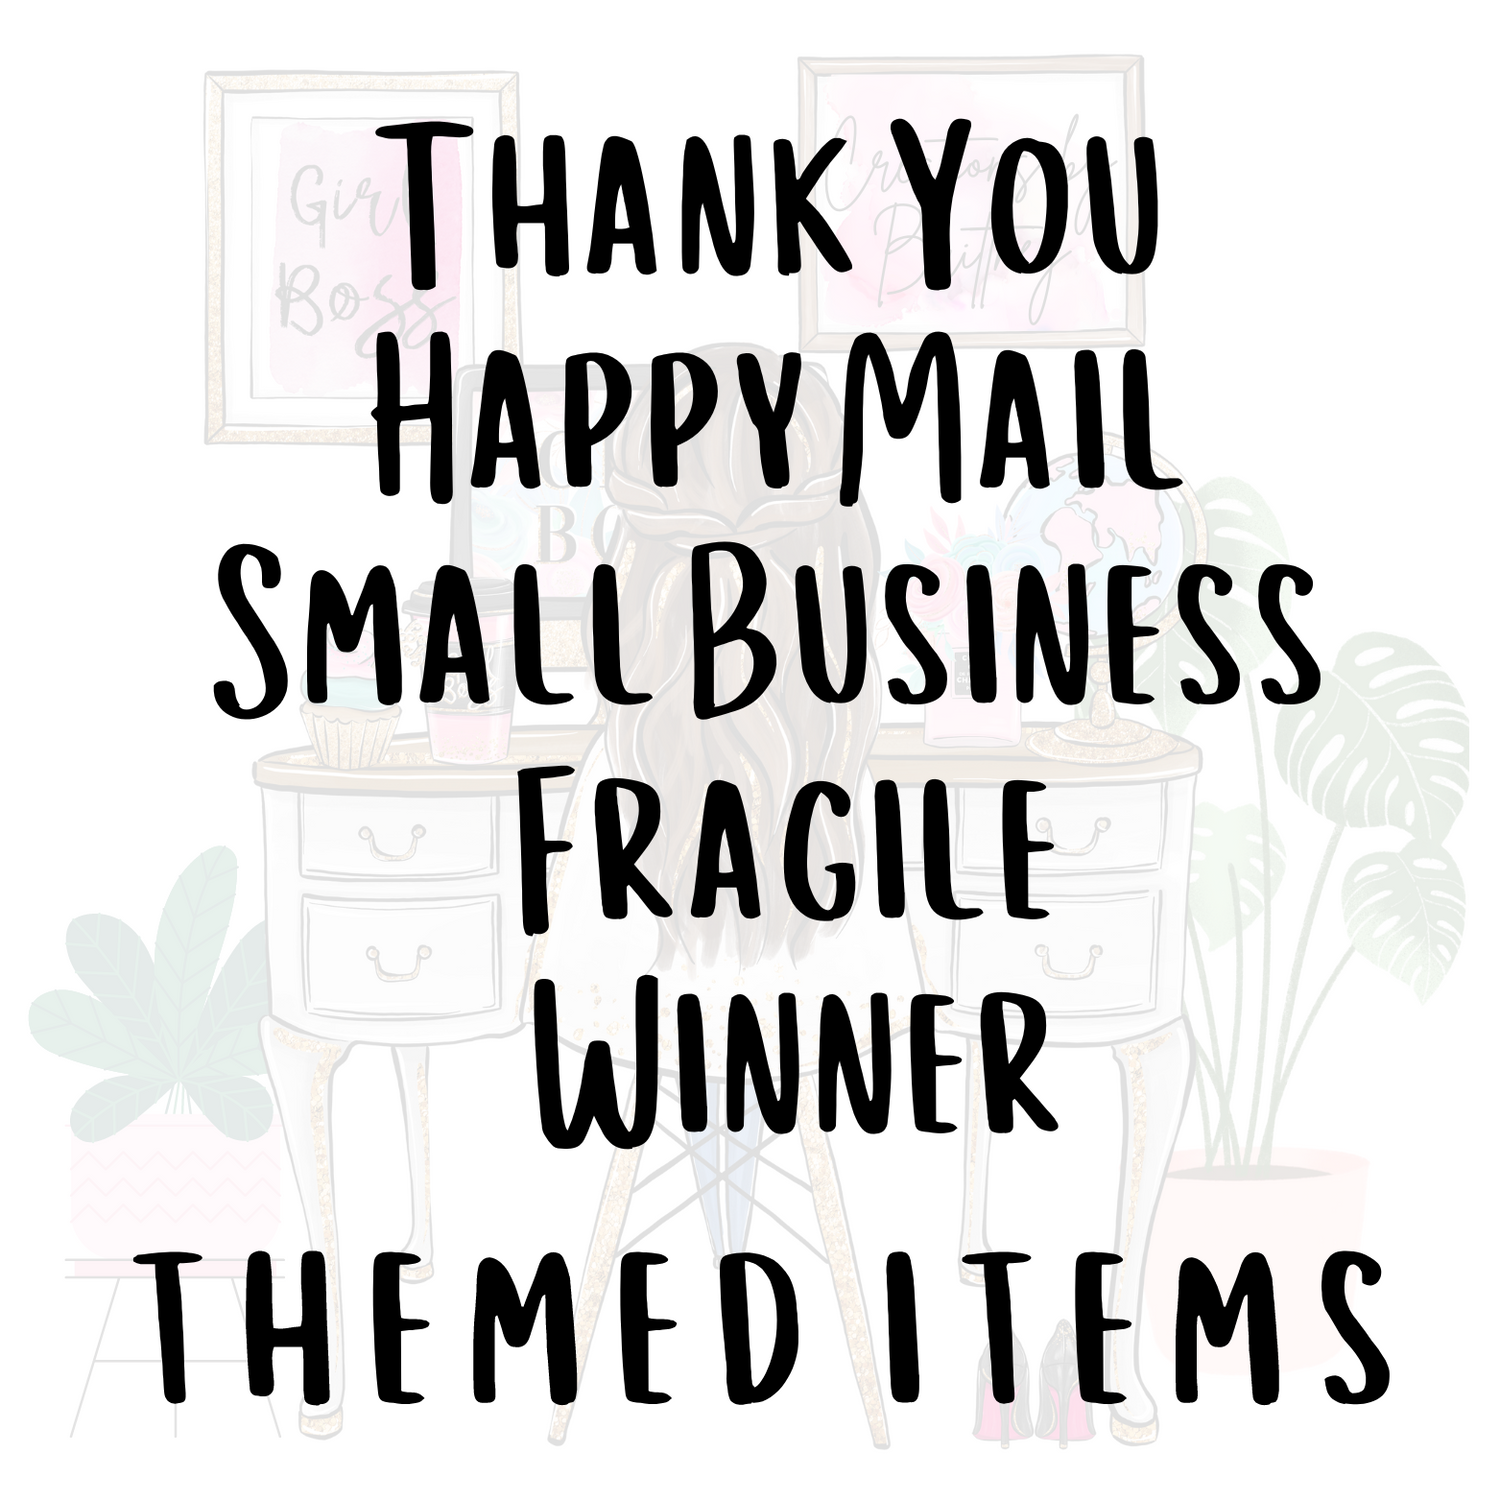 Thank You / Happy Mail / Small Business / Fragile / Winner